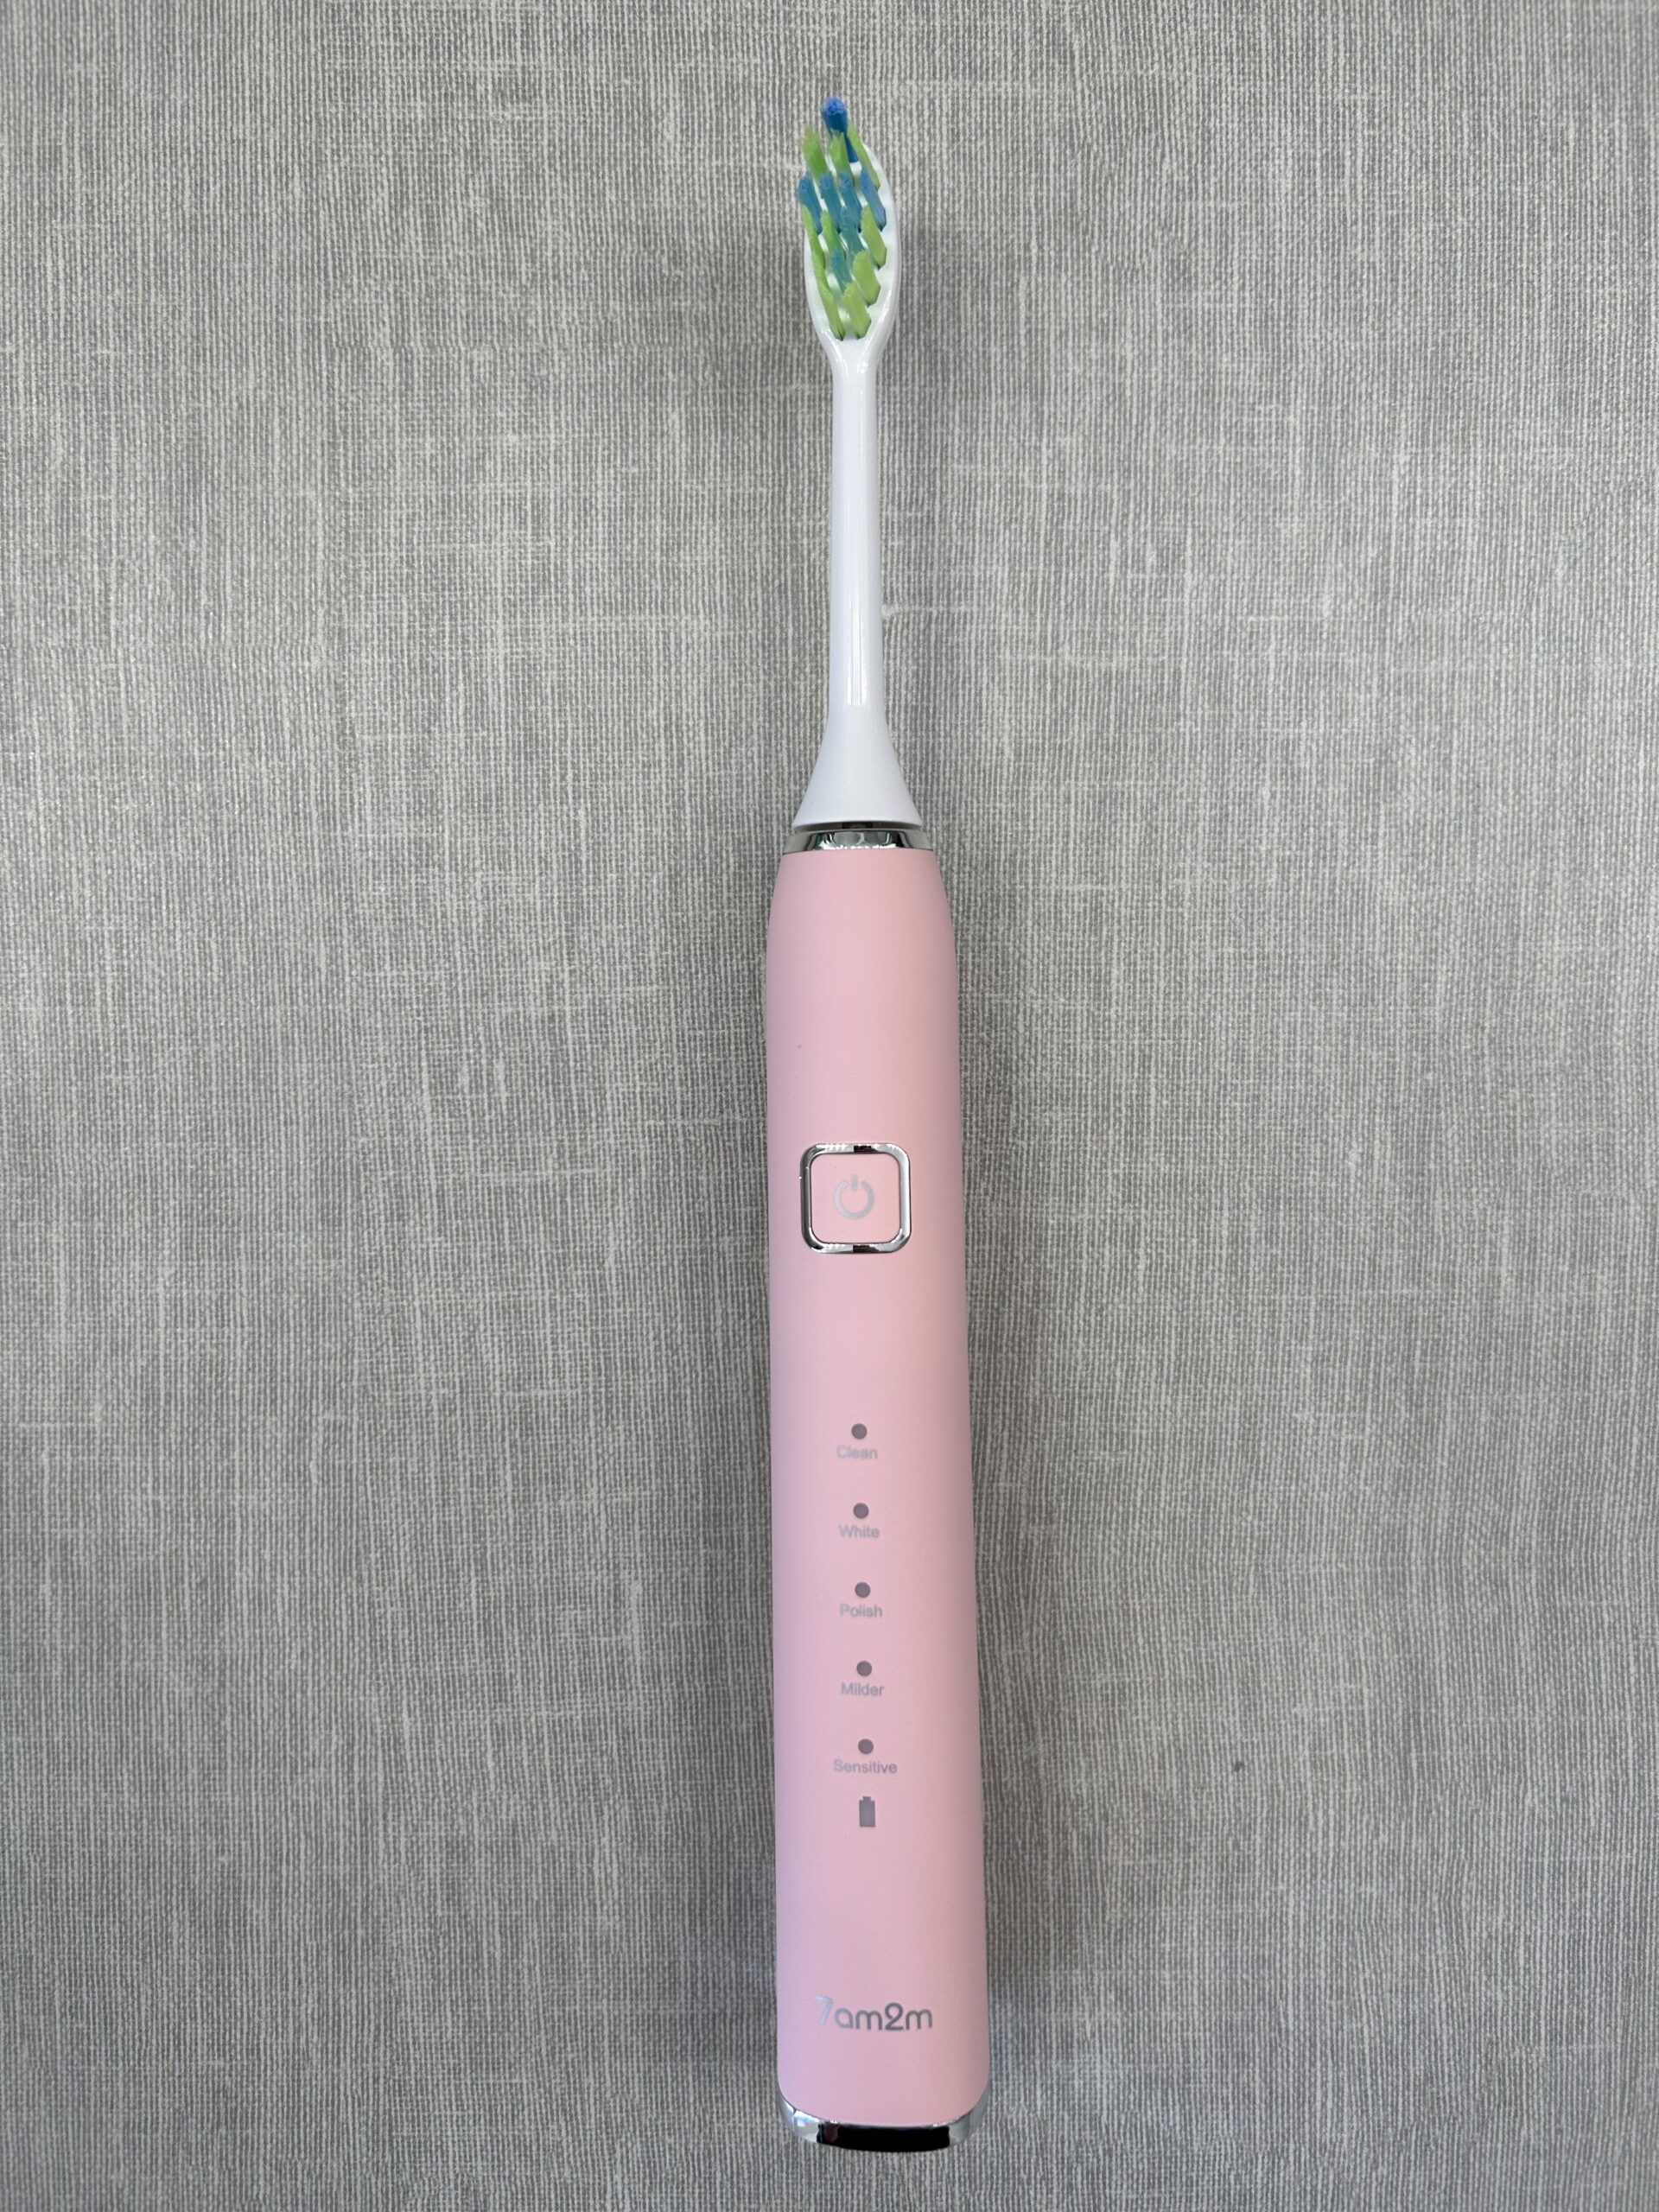 7am2m Sonic Electric Toothbrush (Dentist Tested & Reviewed) | My Dental Advocate